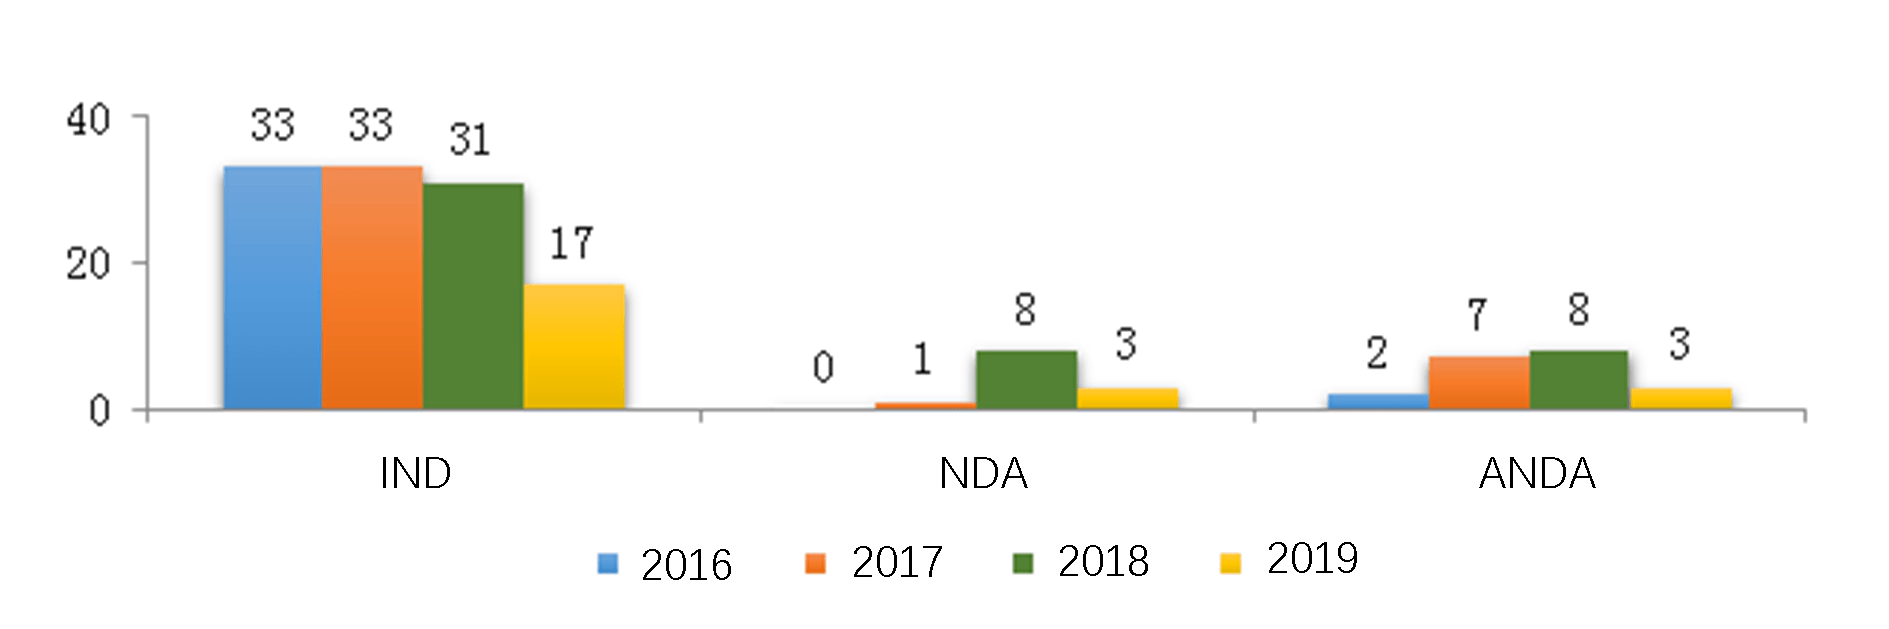 Fig. 9 Number of Traditional Chinese Medicine Registrations Approved from 2016 to 2019 for INDs, NDAs and ANDAs